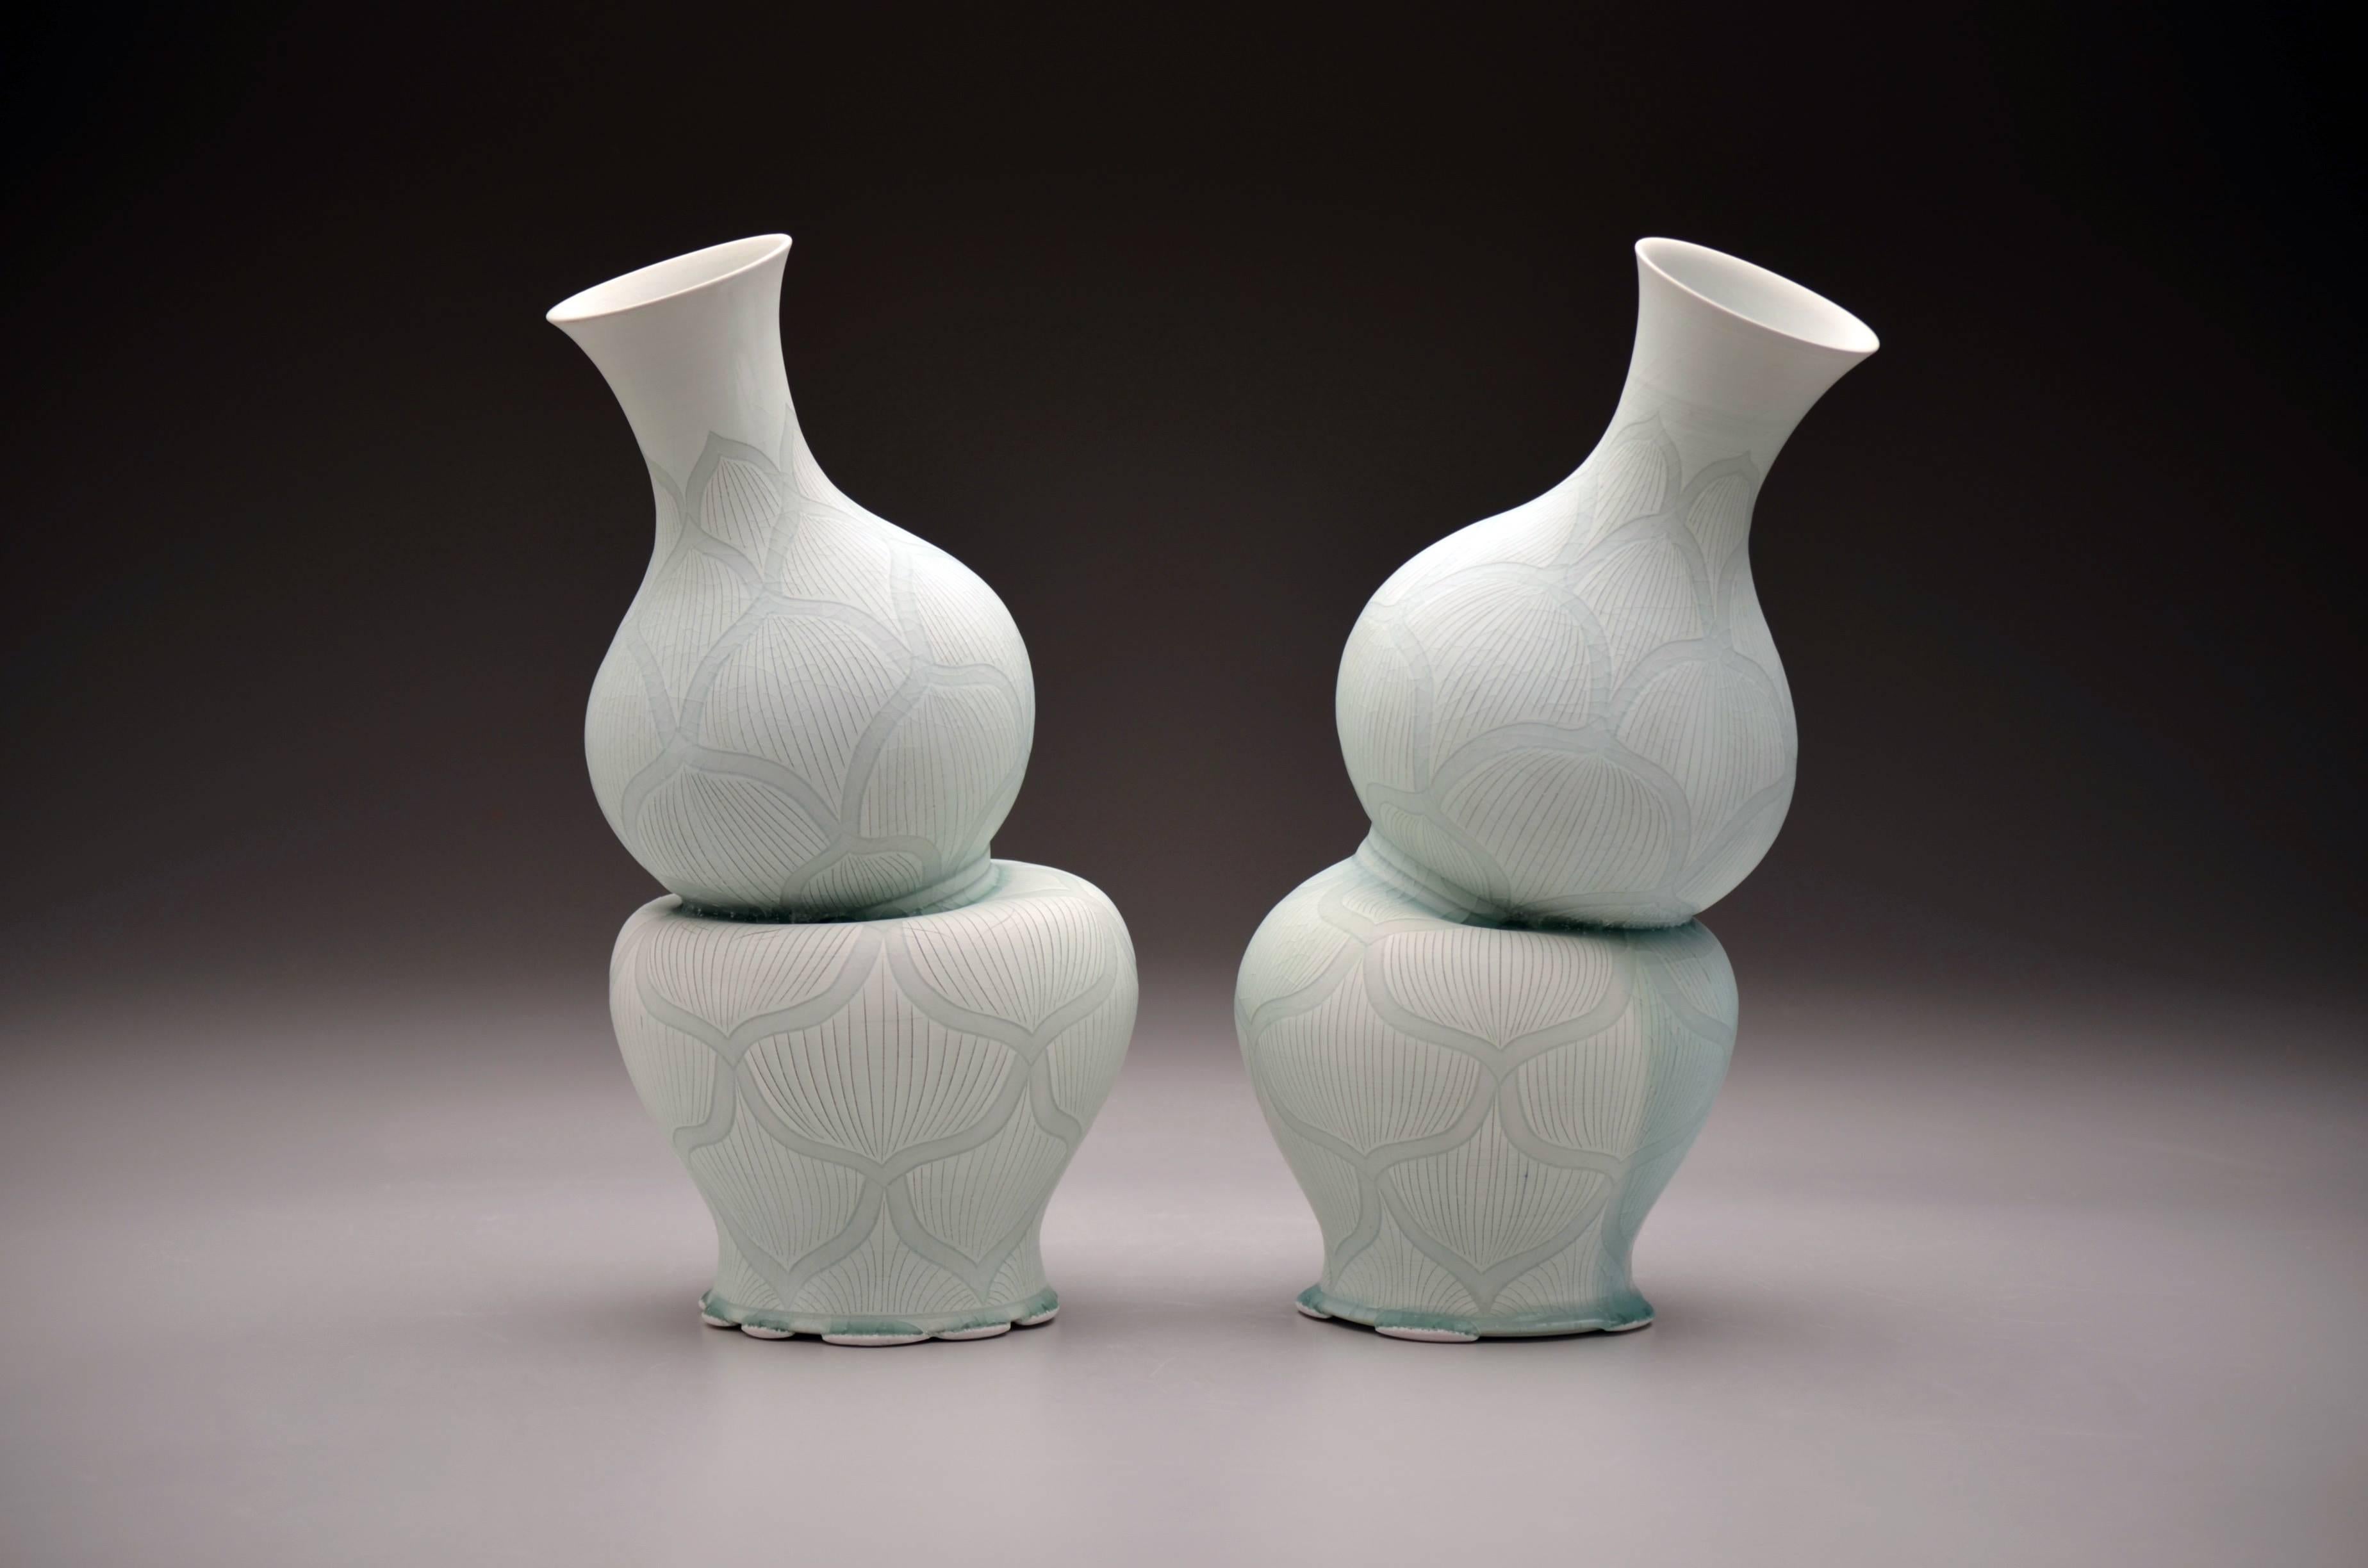 Gourd Vases with Lotus Pattern by Steven Young Lee, Porcelain Sculpture, 2016 1